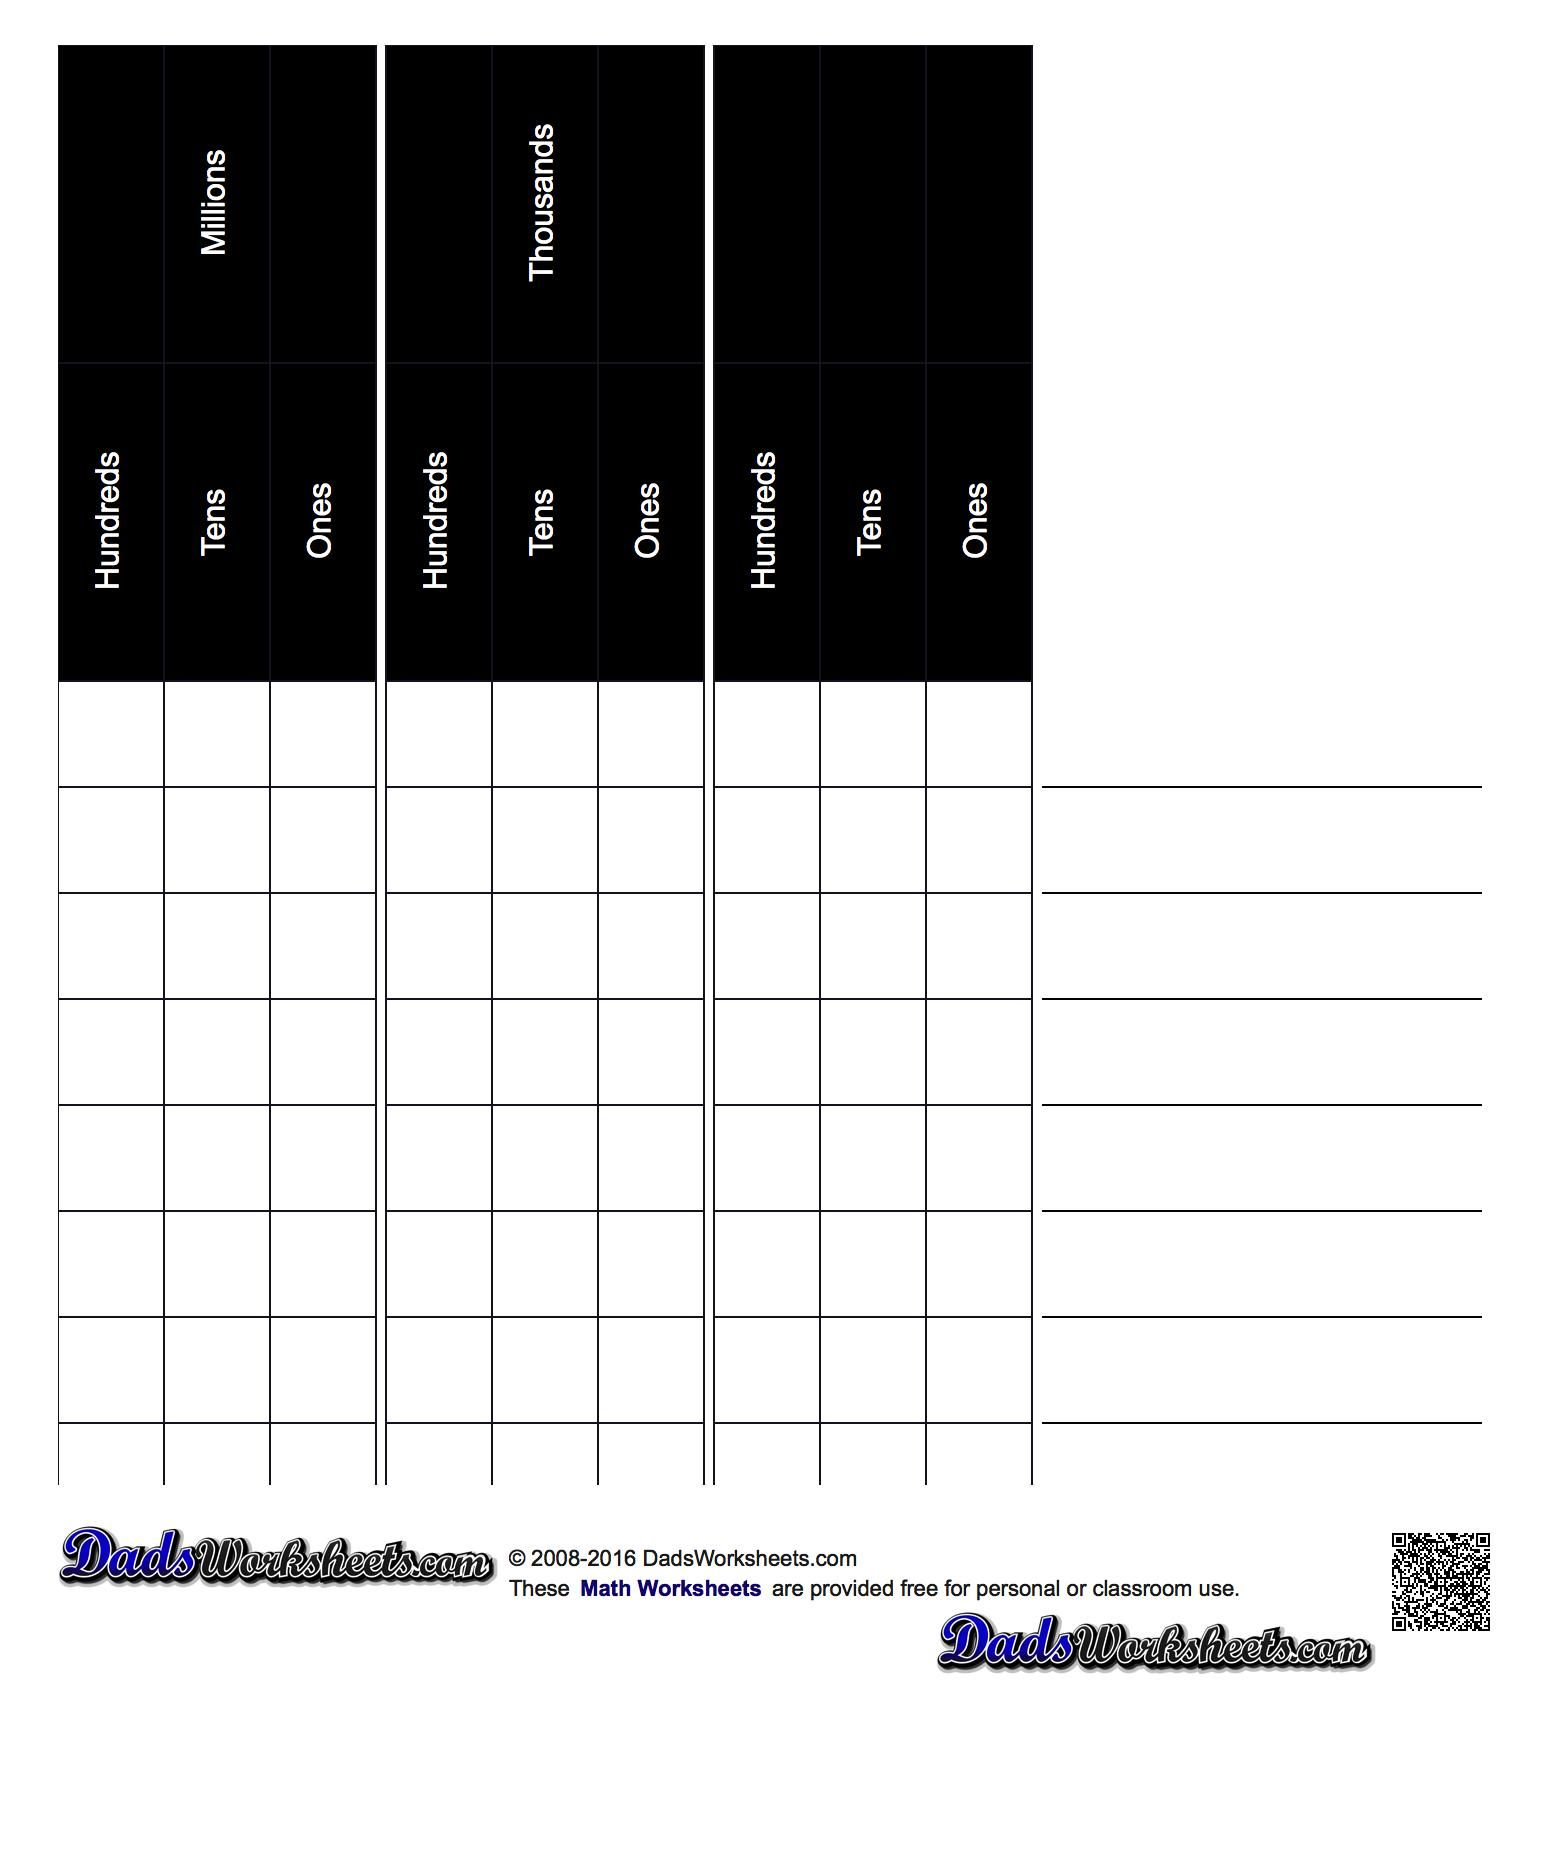 Printable Place Value Chart With Decimals And Periods | Math - Free Printable Place Value Chart